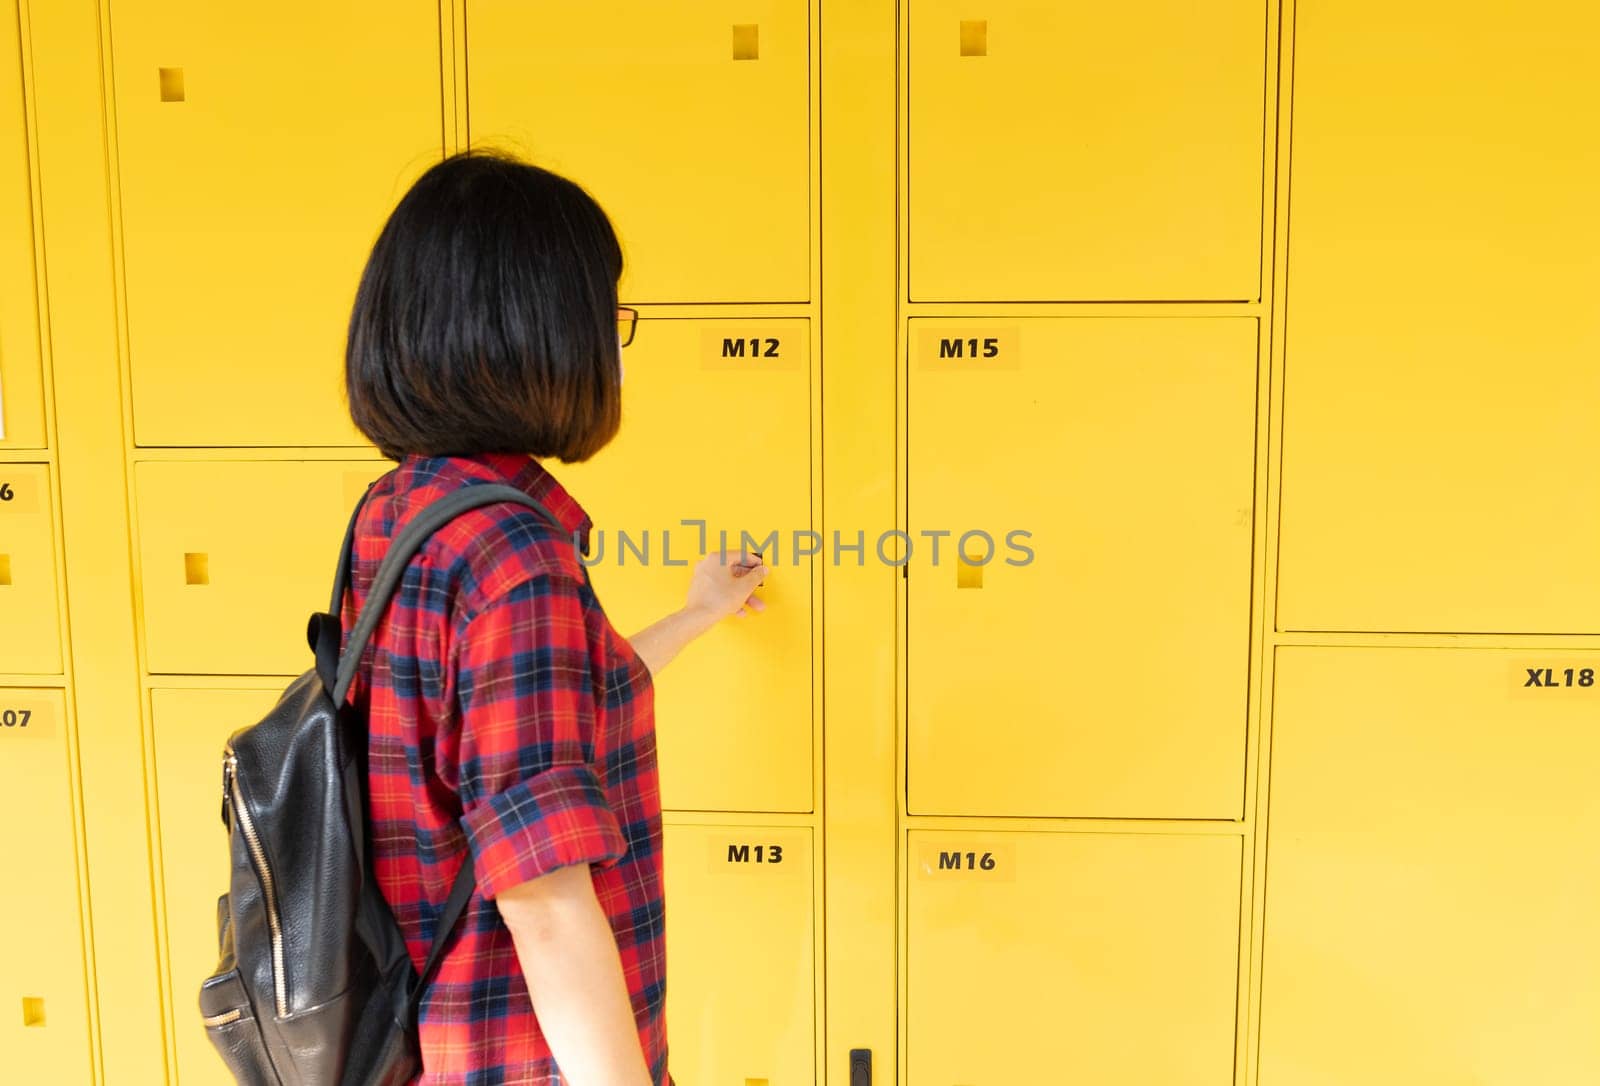 Self-service storage locker. Tourist uses the service of automated locker storage. Luggage and parcel delivery service. Package locker. Mass transit system. Hour and daily storage of items luggages. by Fahroni